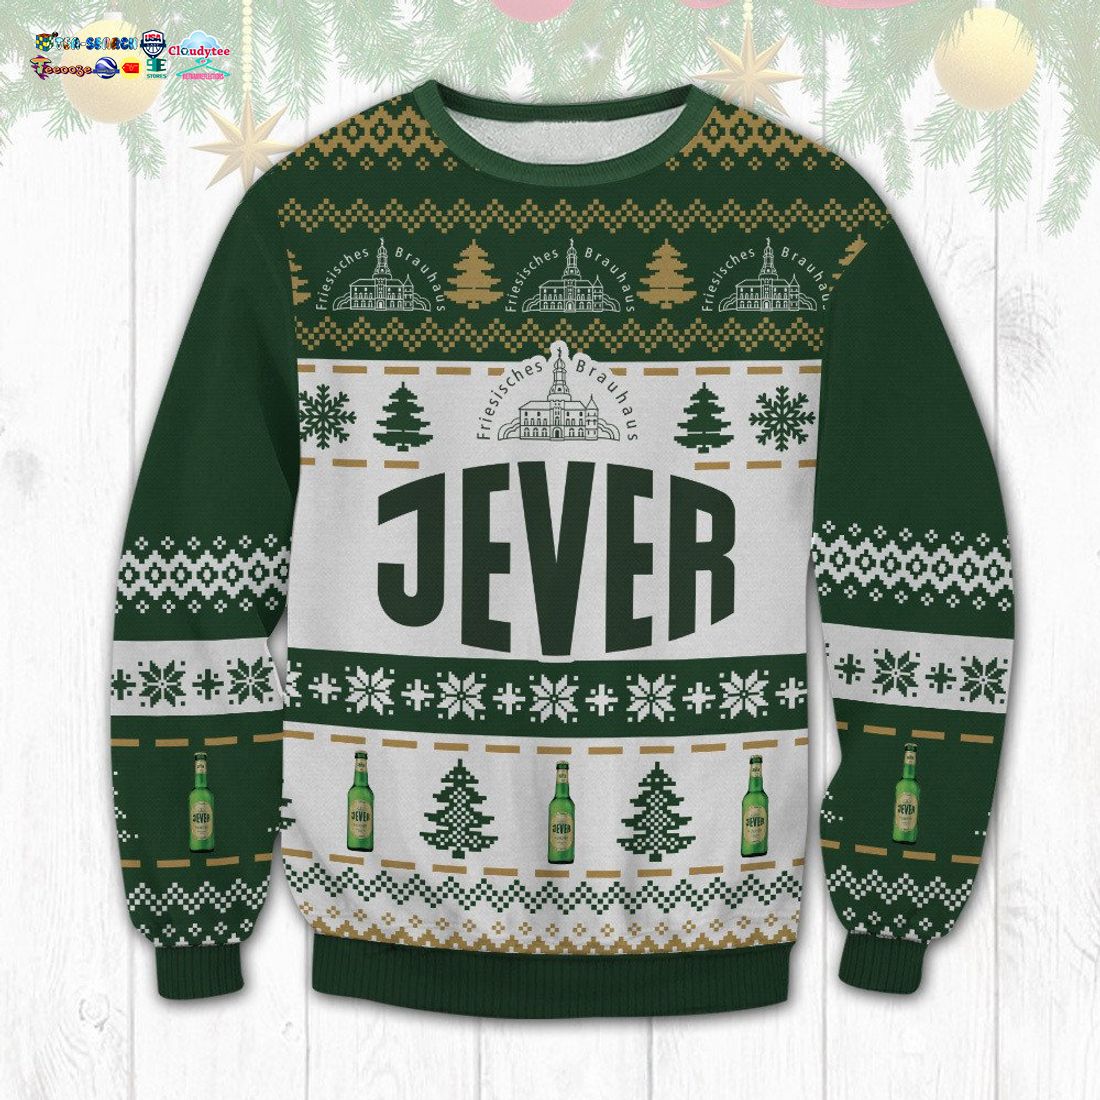 Jever Ugly Christmas Sweater - Stand easy bro